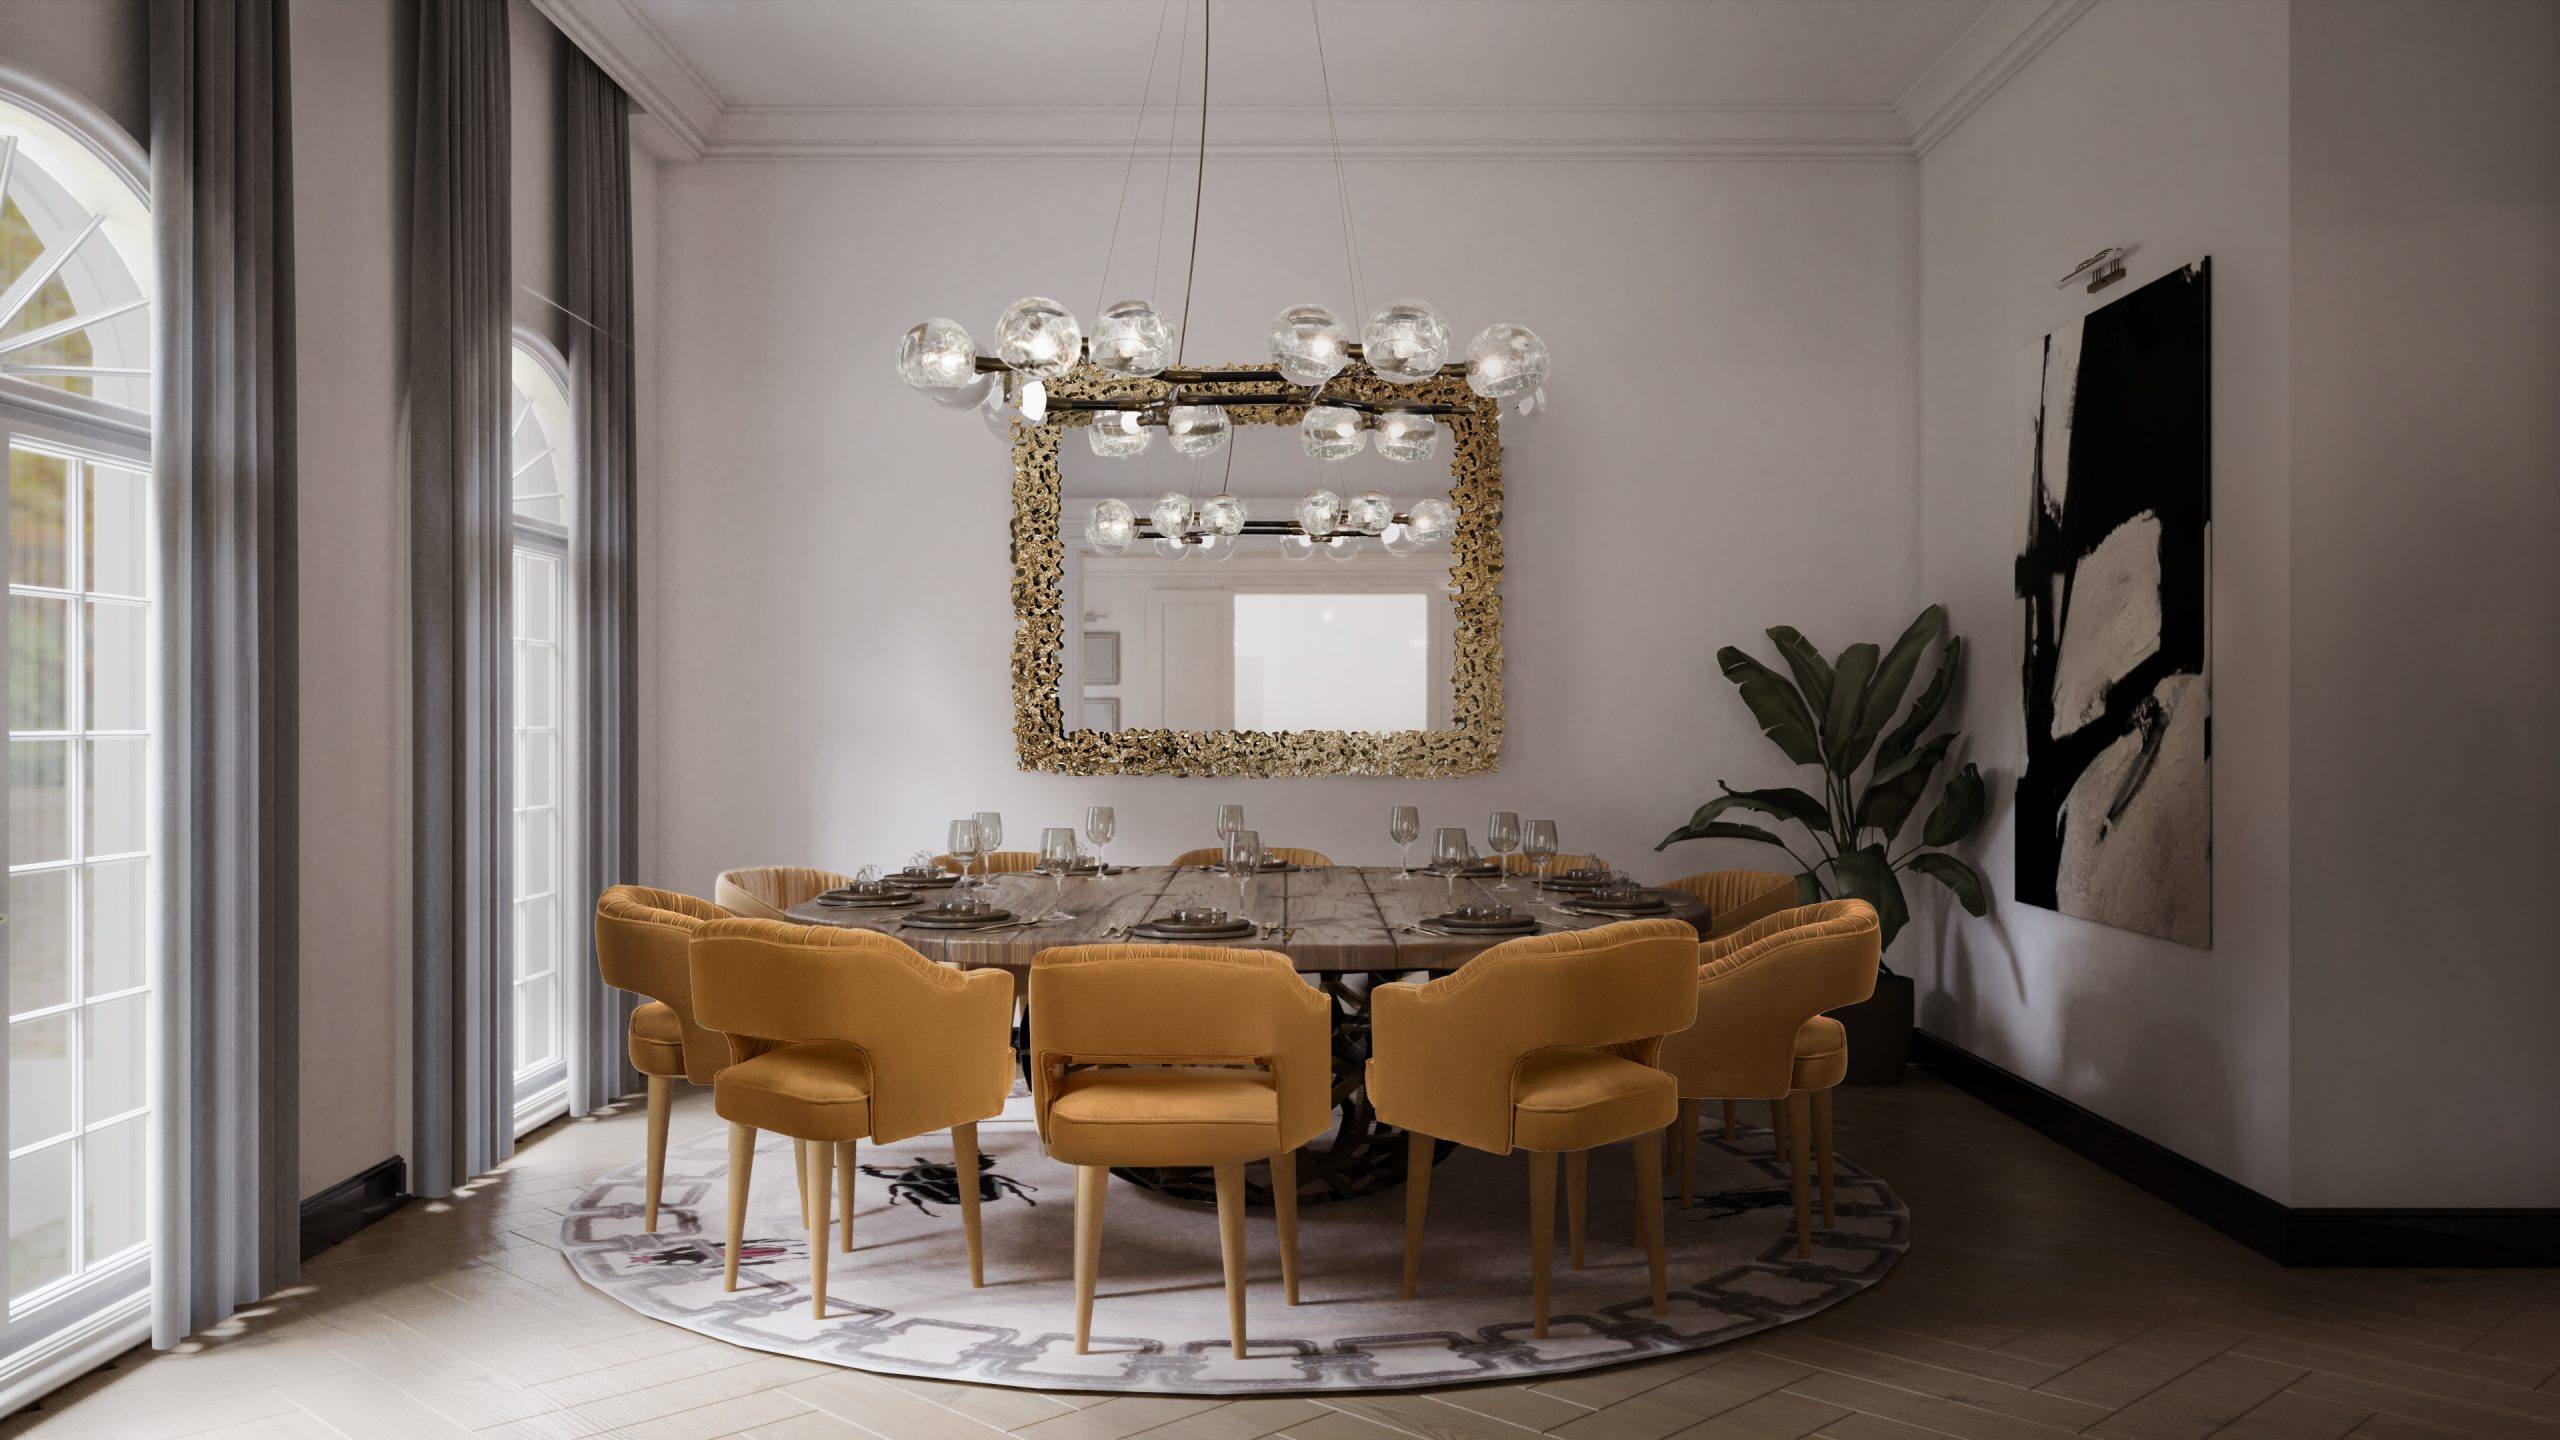 Modern contemporary dining room with Golden Bugs rug - Discover Unique Dining Room Designs for a Modern Home  home inspiration ideas